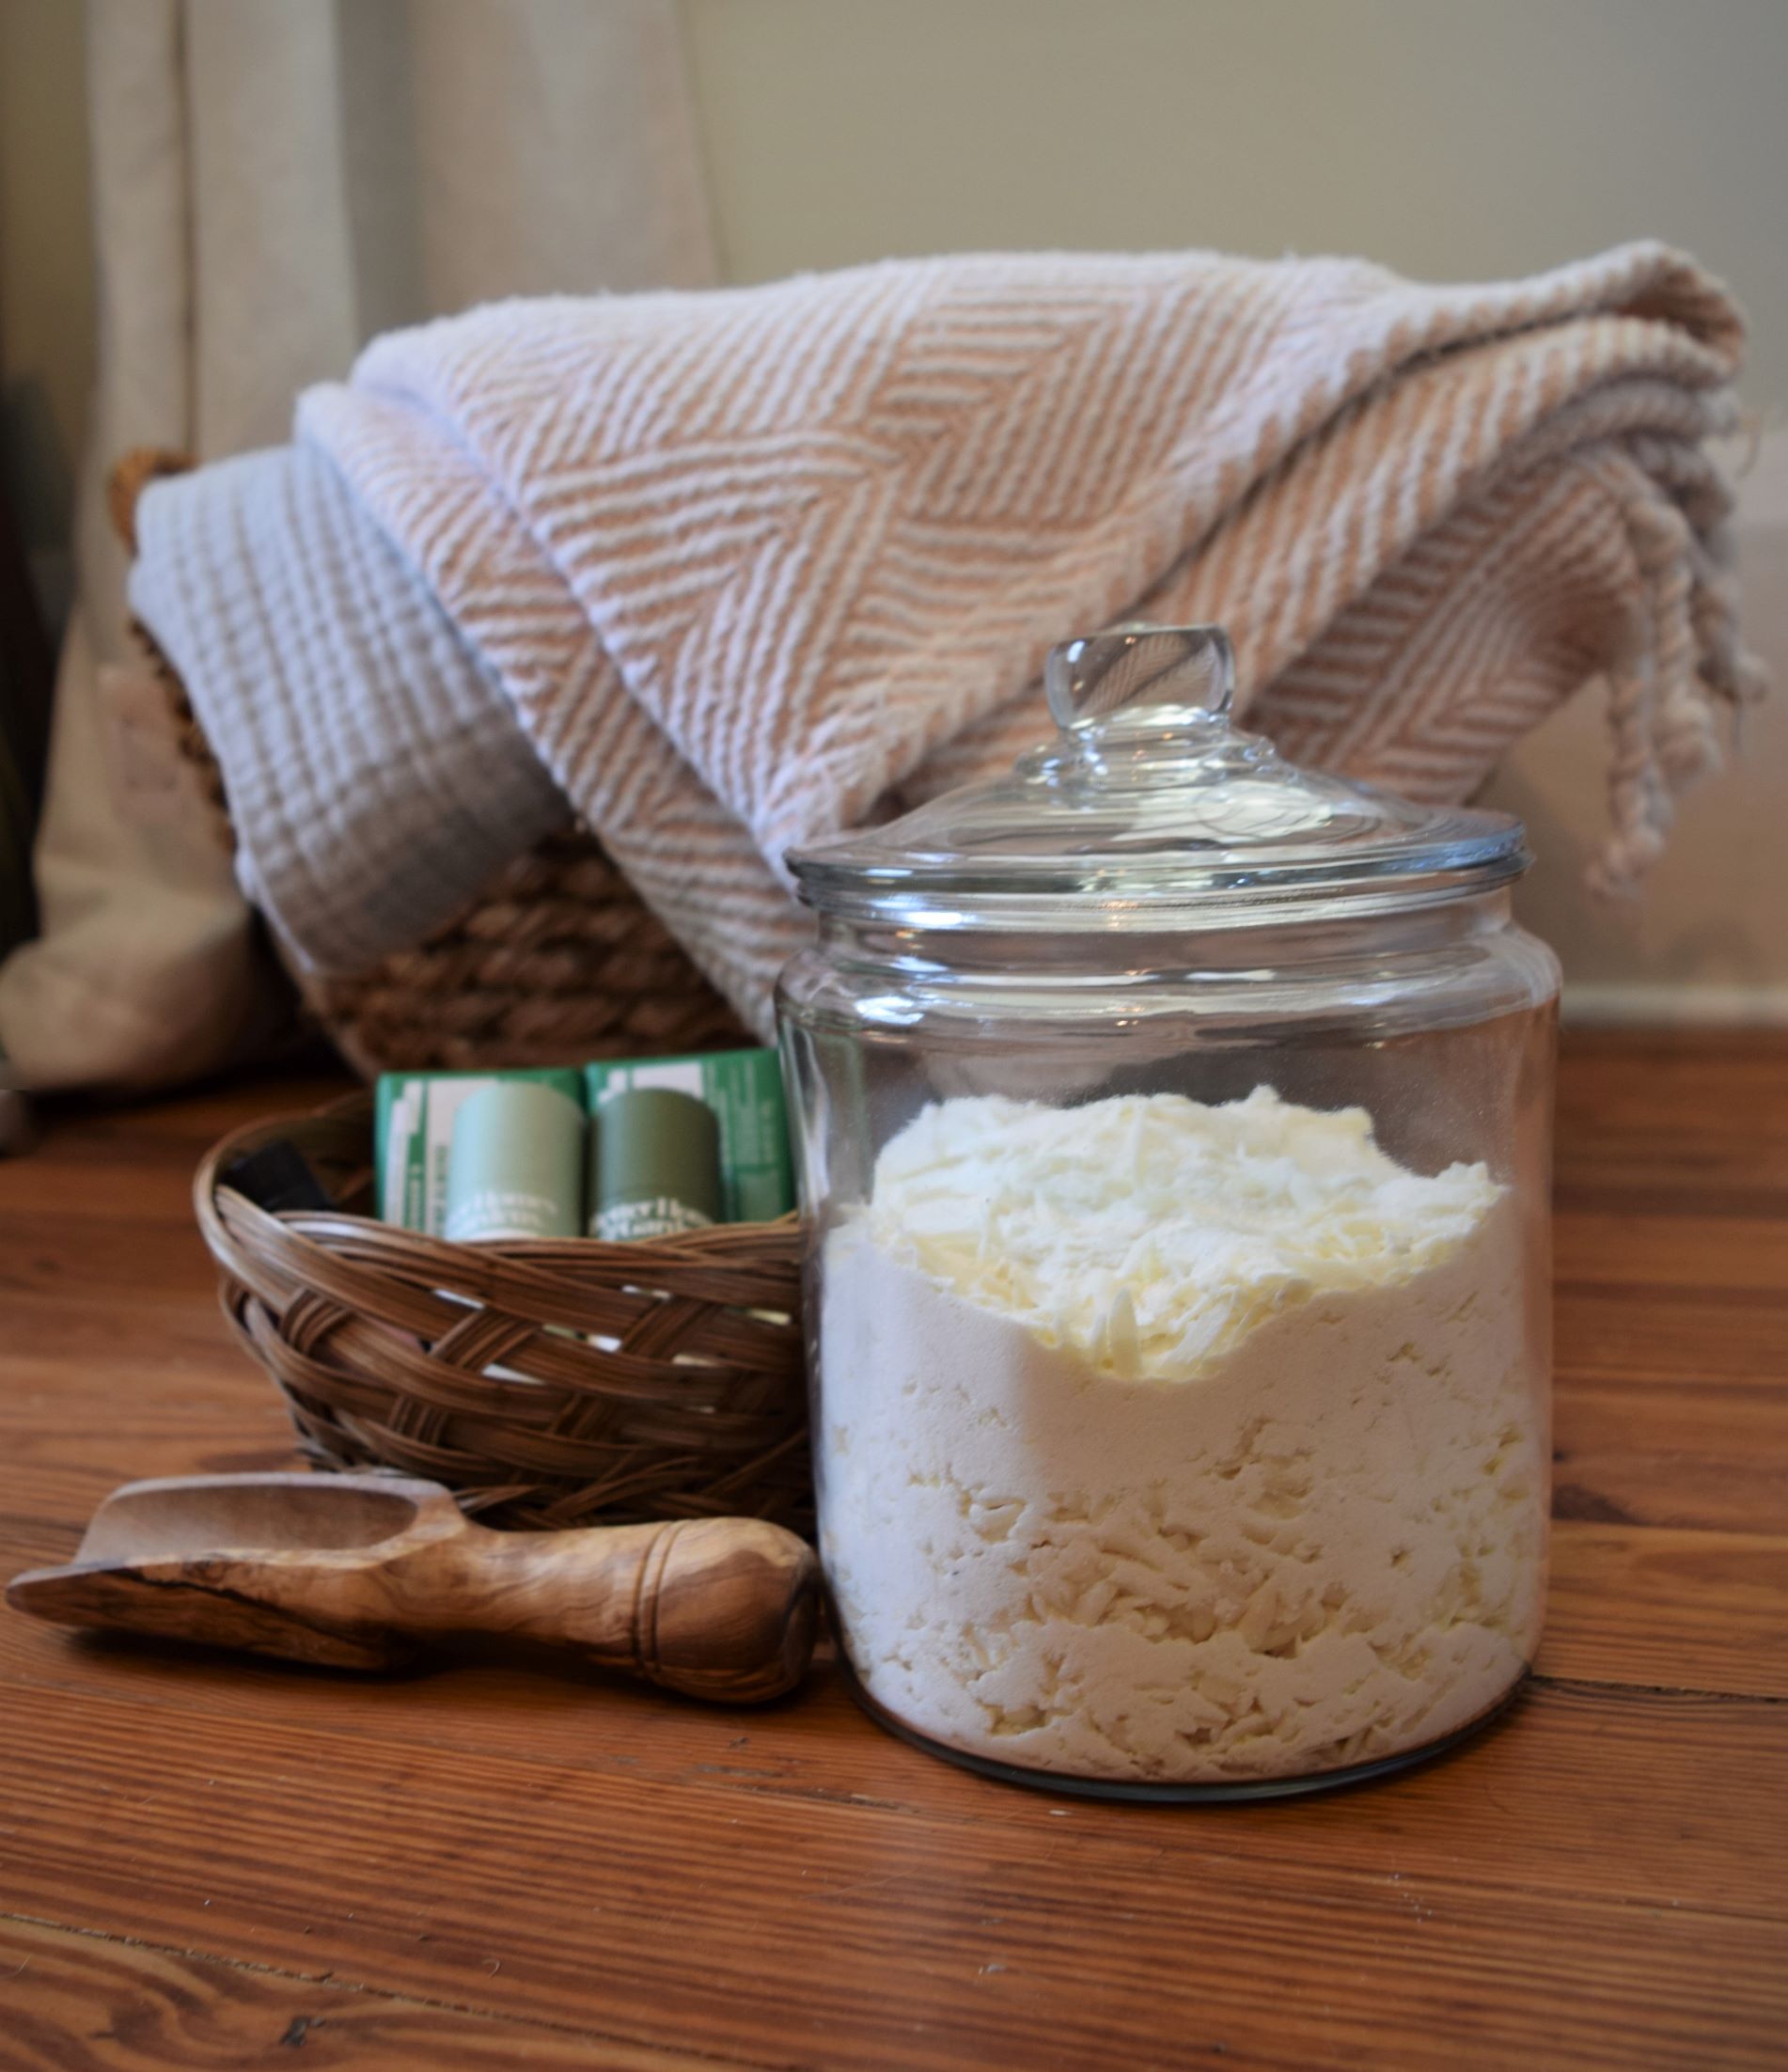 homemade natural laundry detergent fall, spice, jar with wooden scoop, blankets, soap, diy craft project, handmade home, cozy sweater season